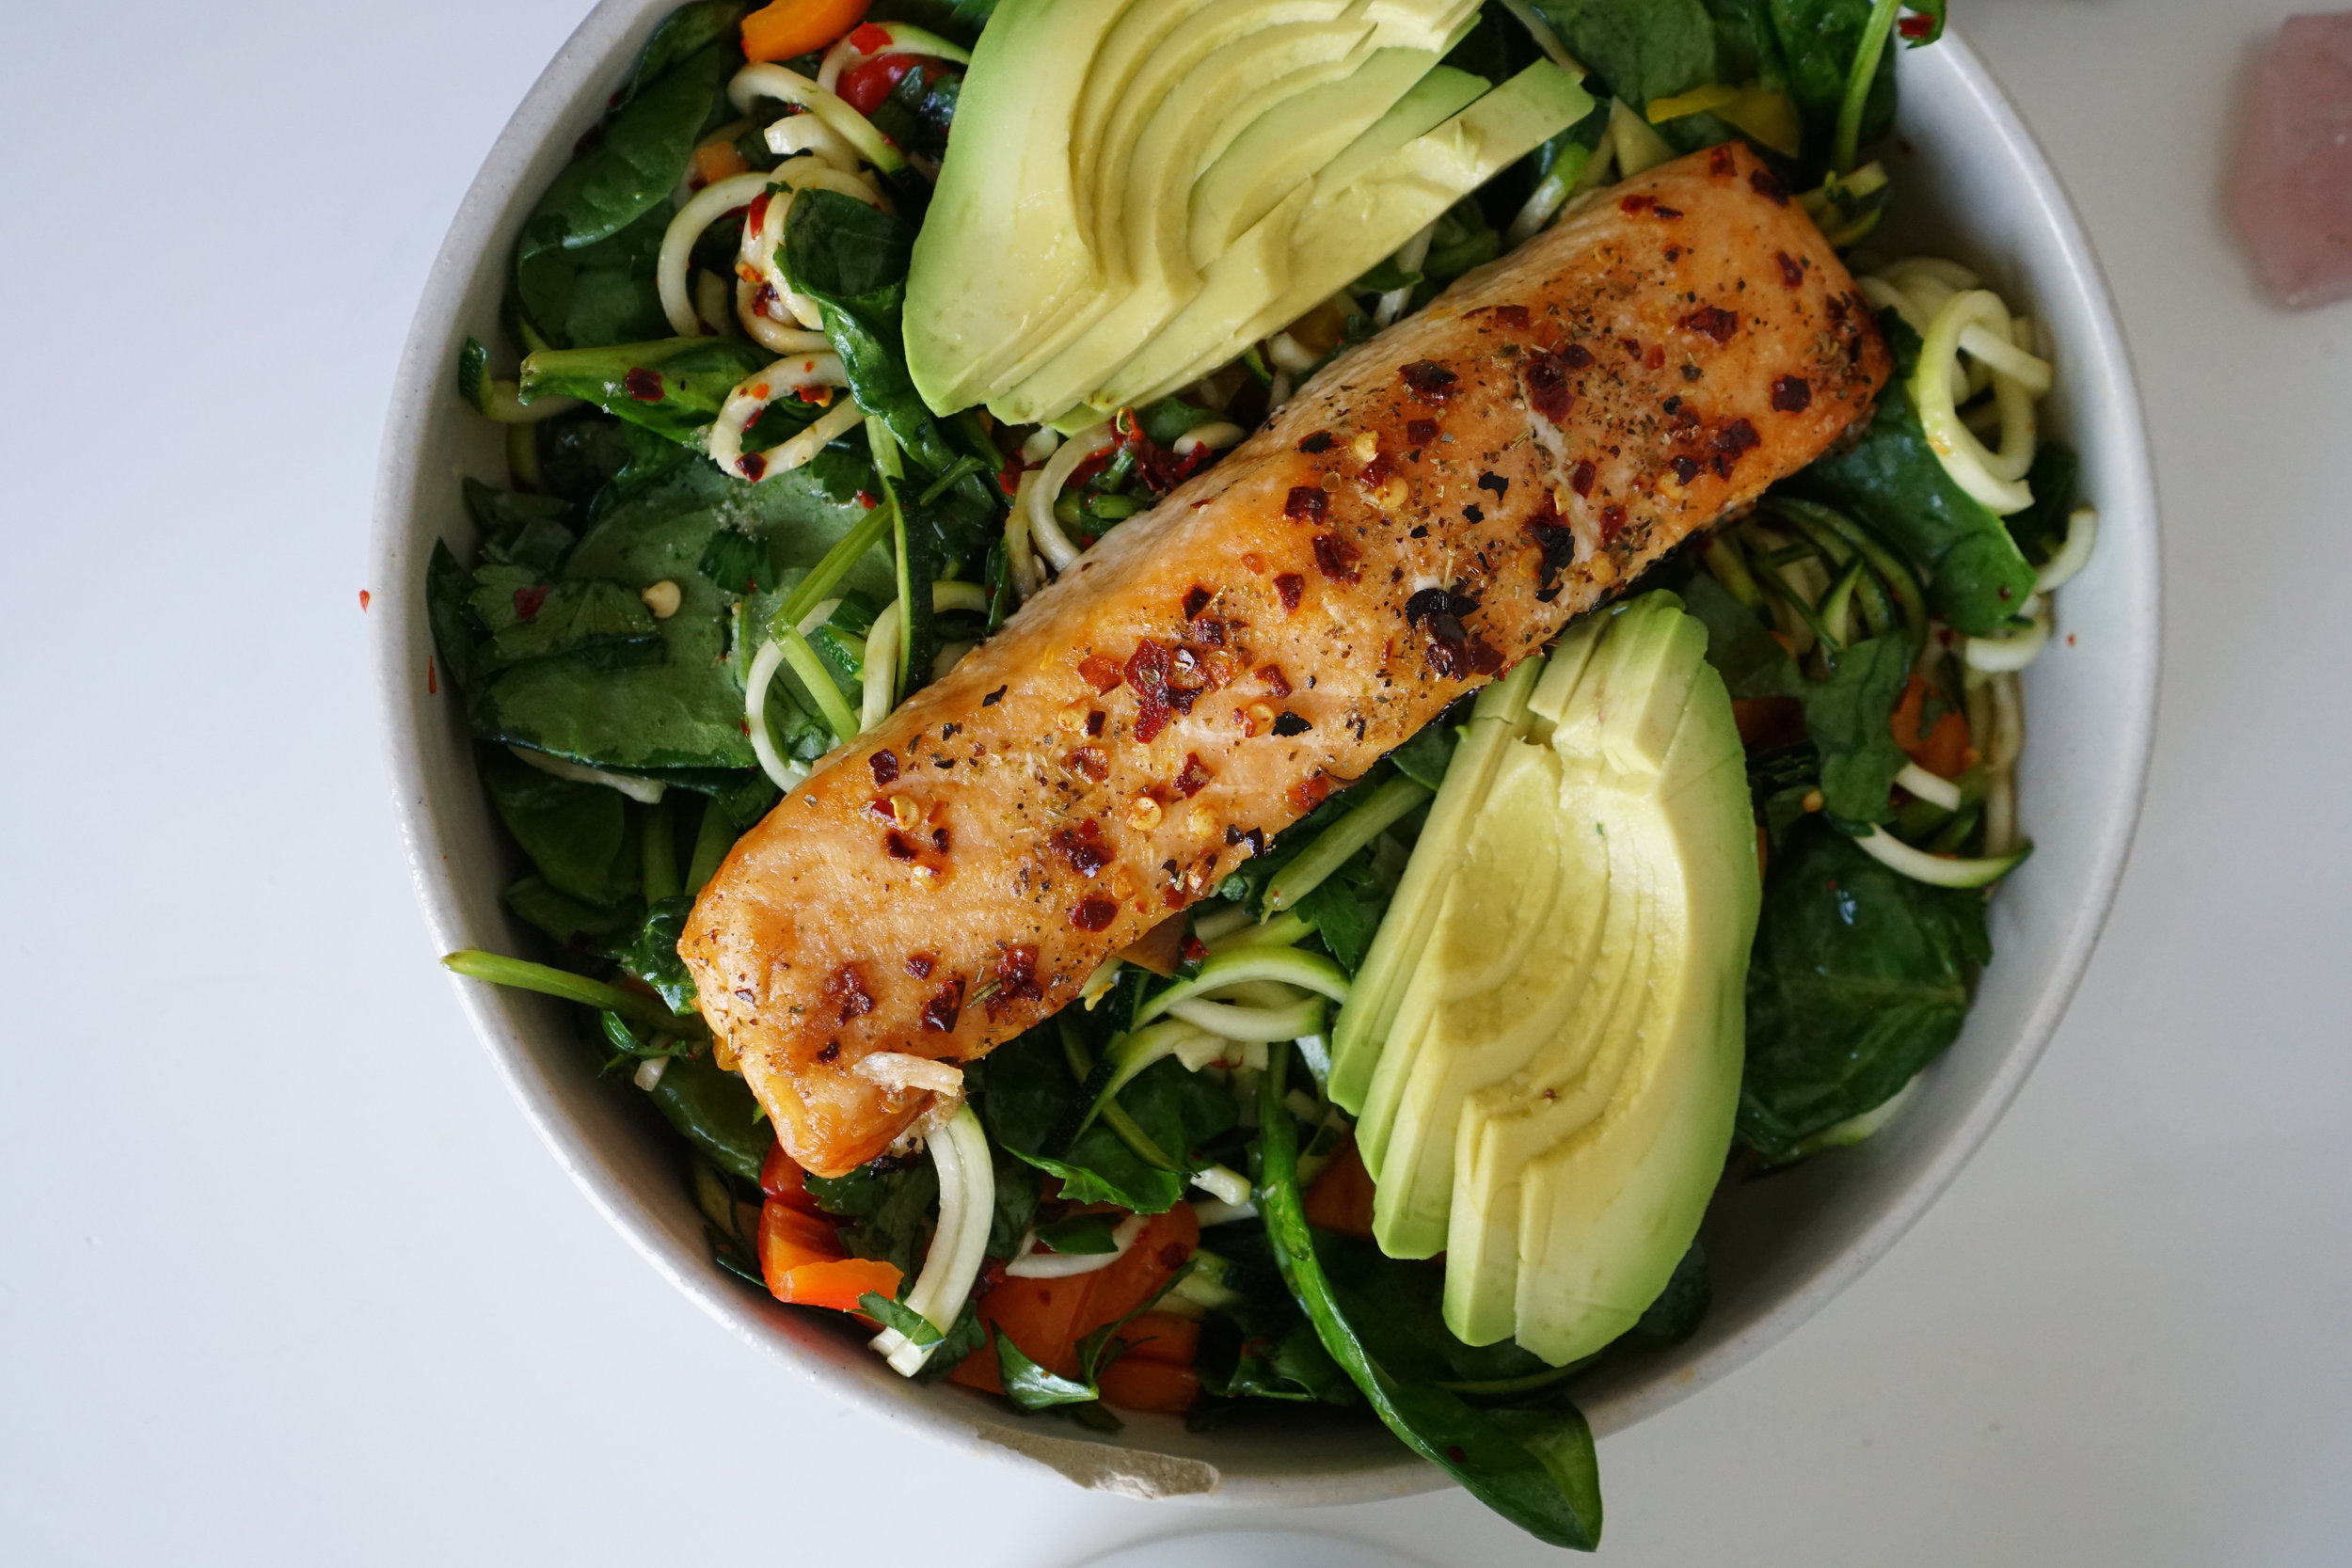 Zucchini Noodles Spinach Salad with Baked Salmon: A Healthy and Delicious Meal